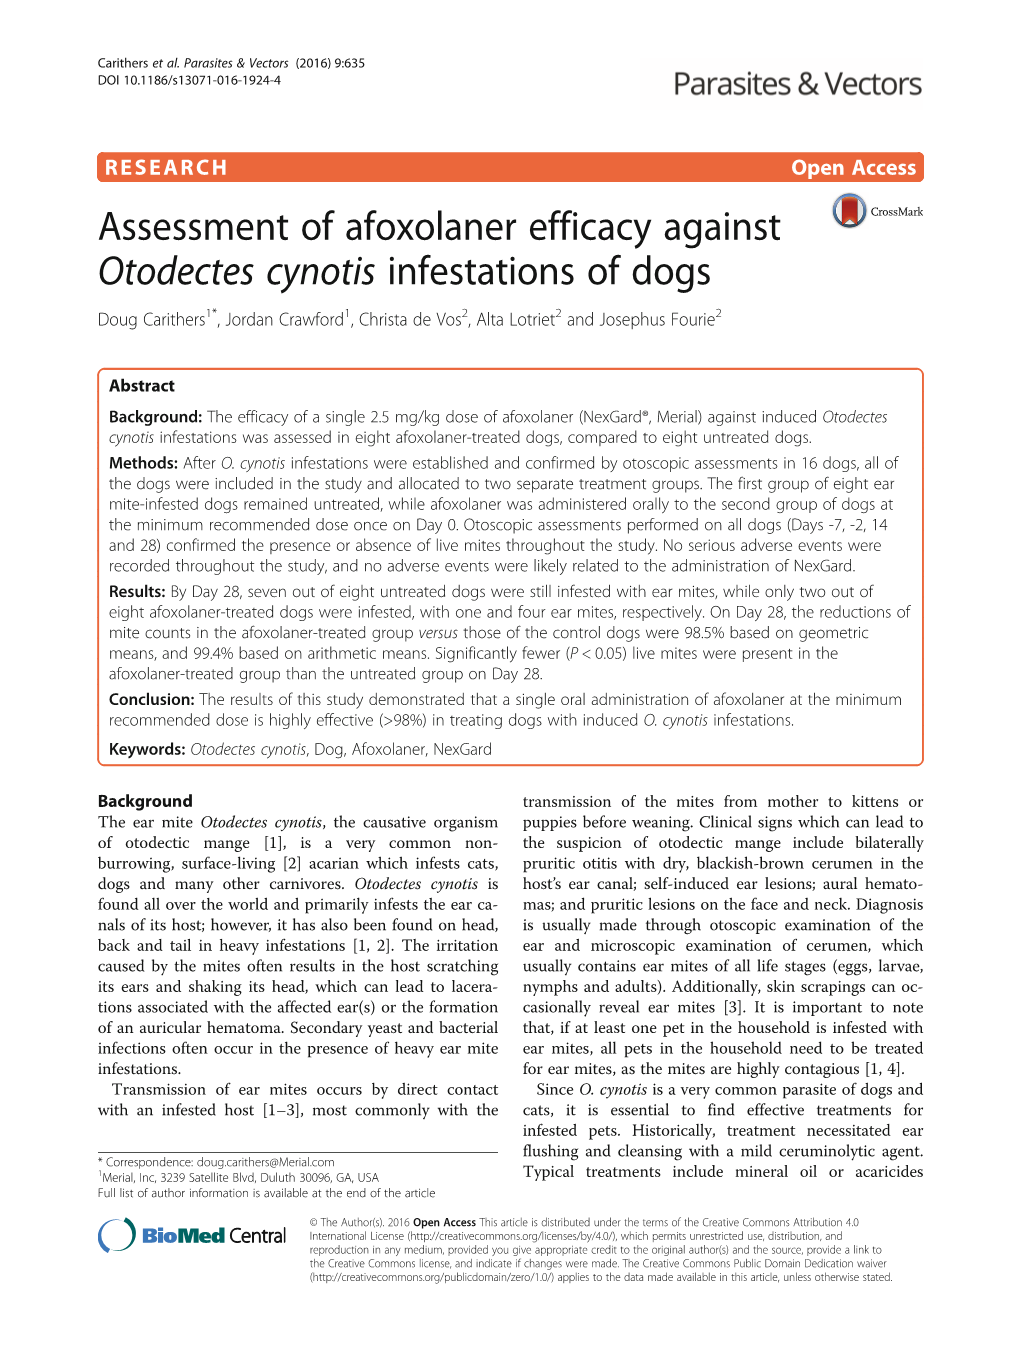 Assessment of Afoxolaner Efficacy Against Otodectes Cynotis